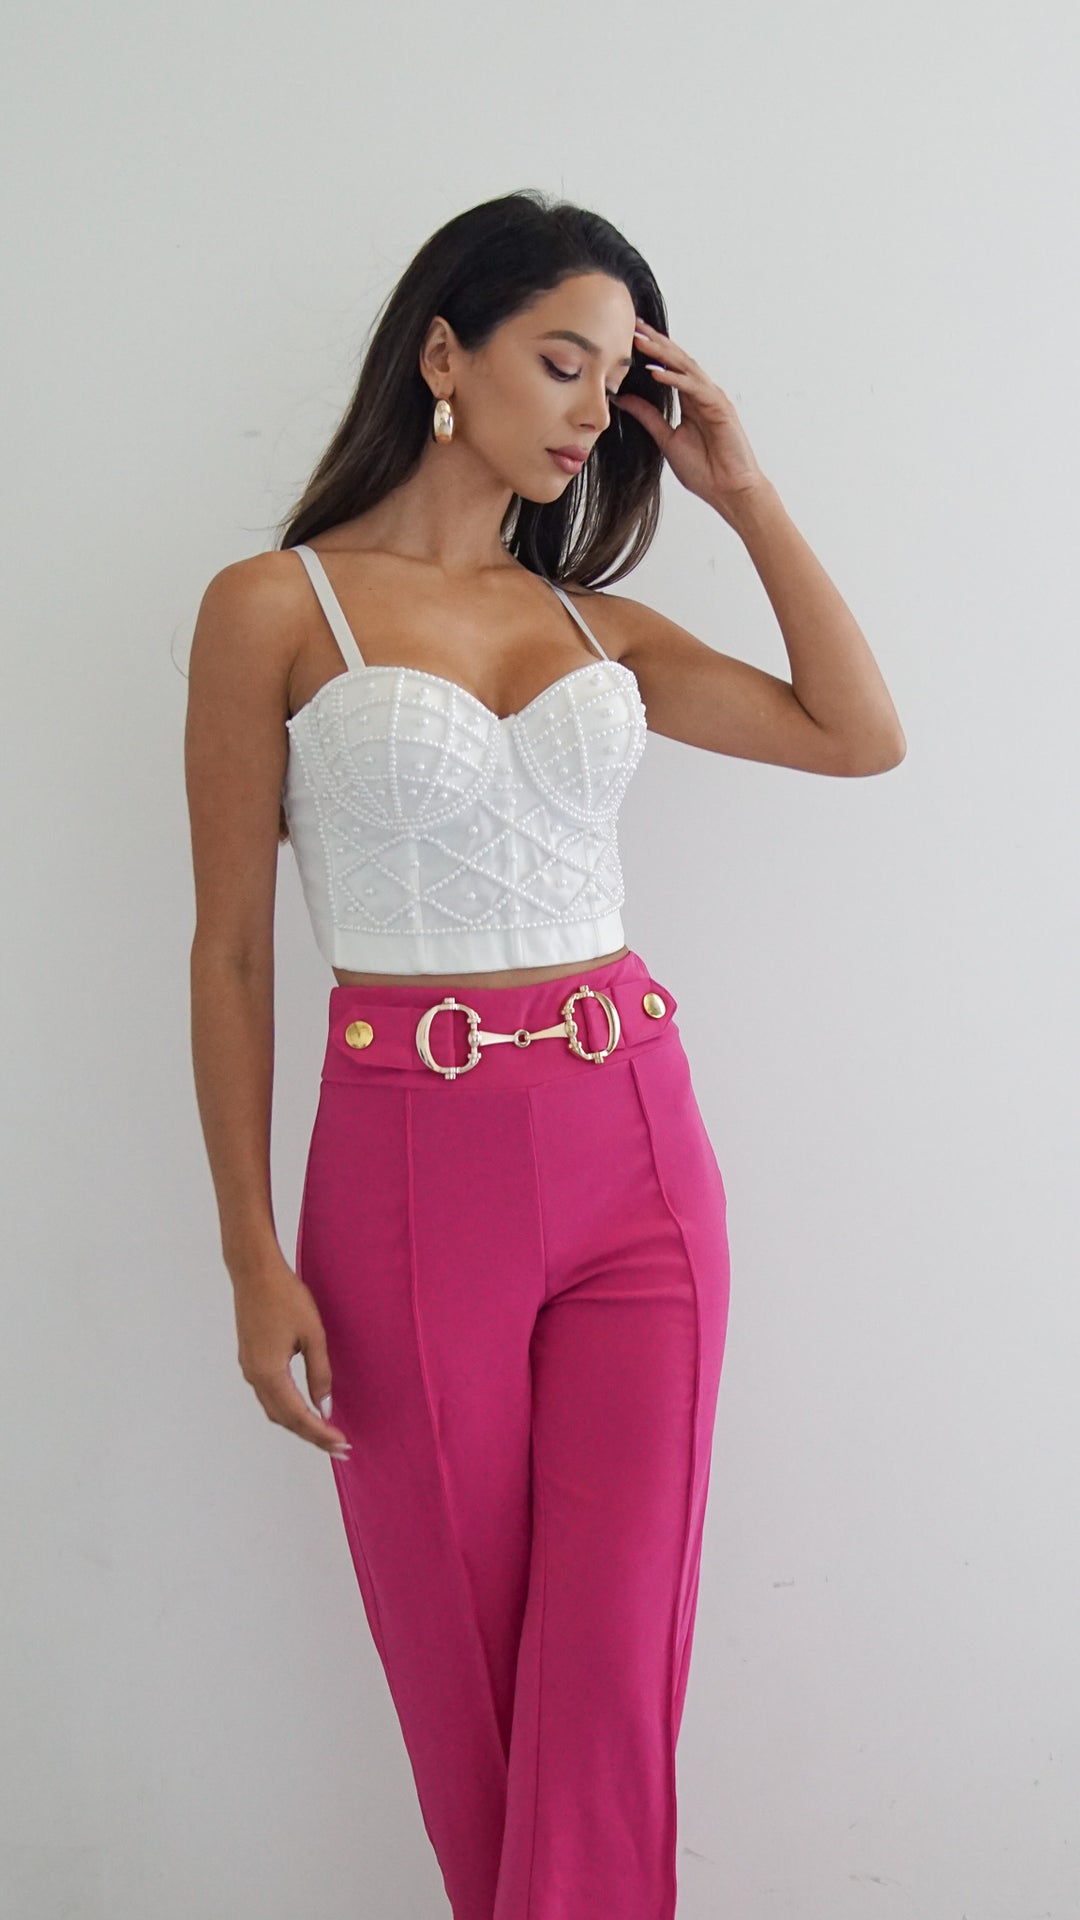 Thaïs Cropped Bustier Top - Steps New York